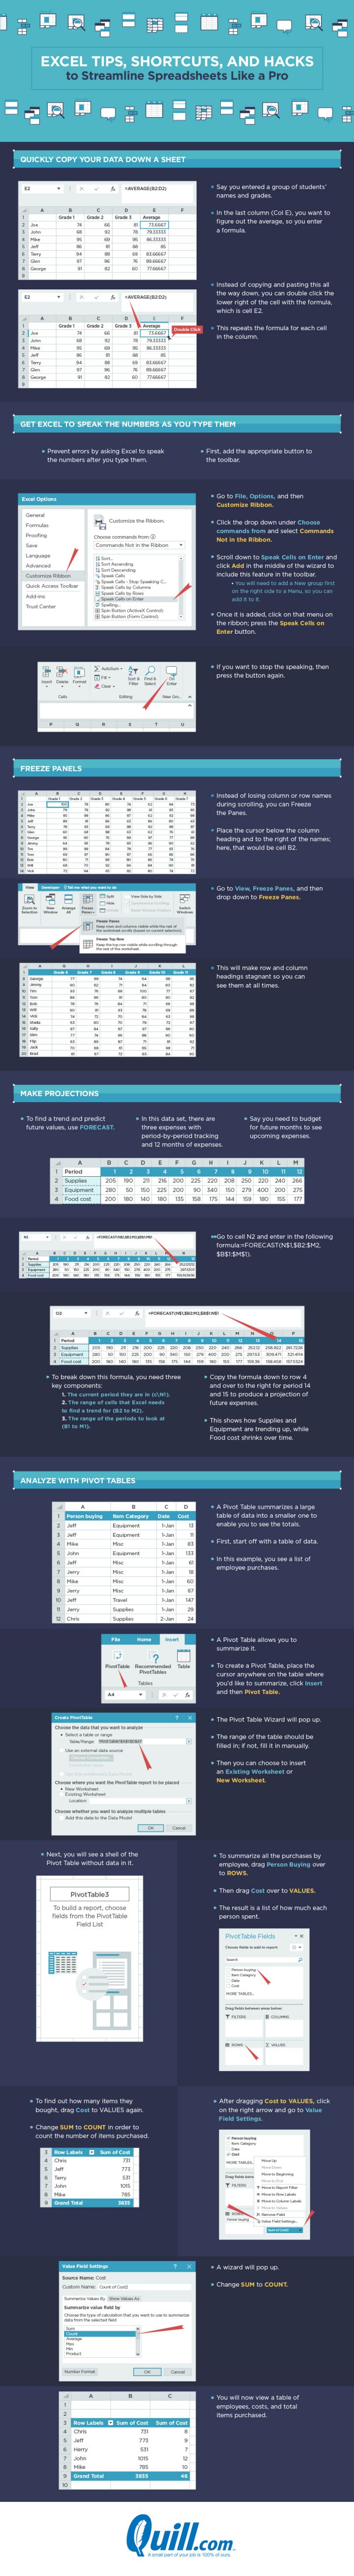 Five Extremely Useful Microsoft Excel Tricks [Infographic]